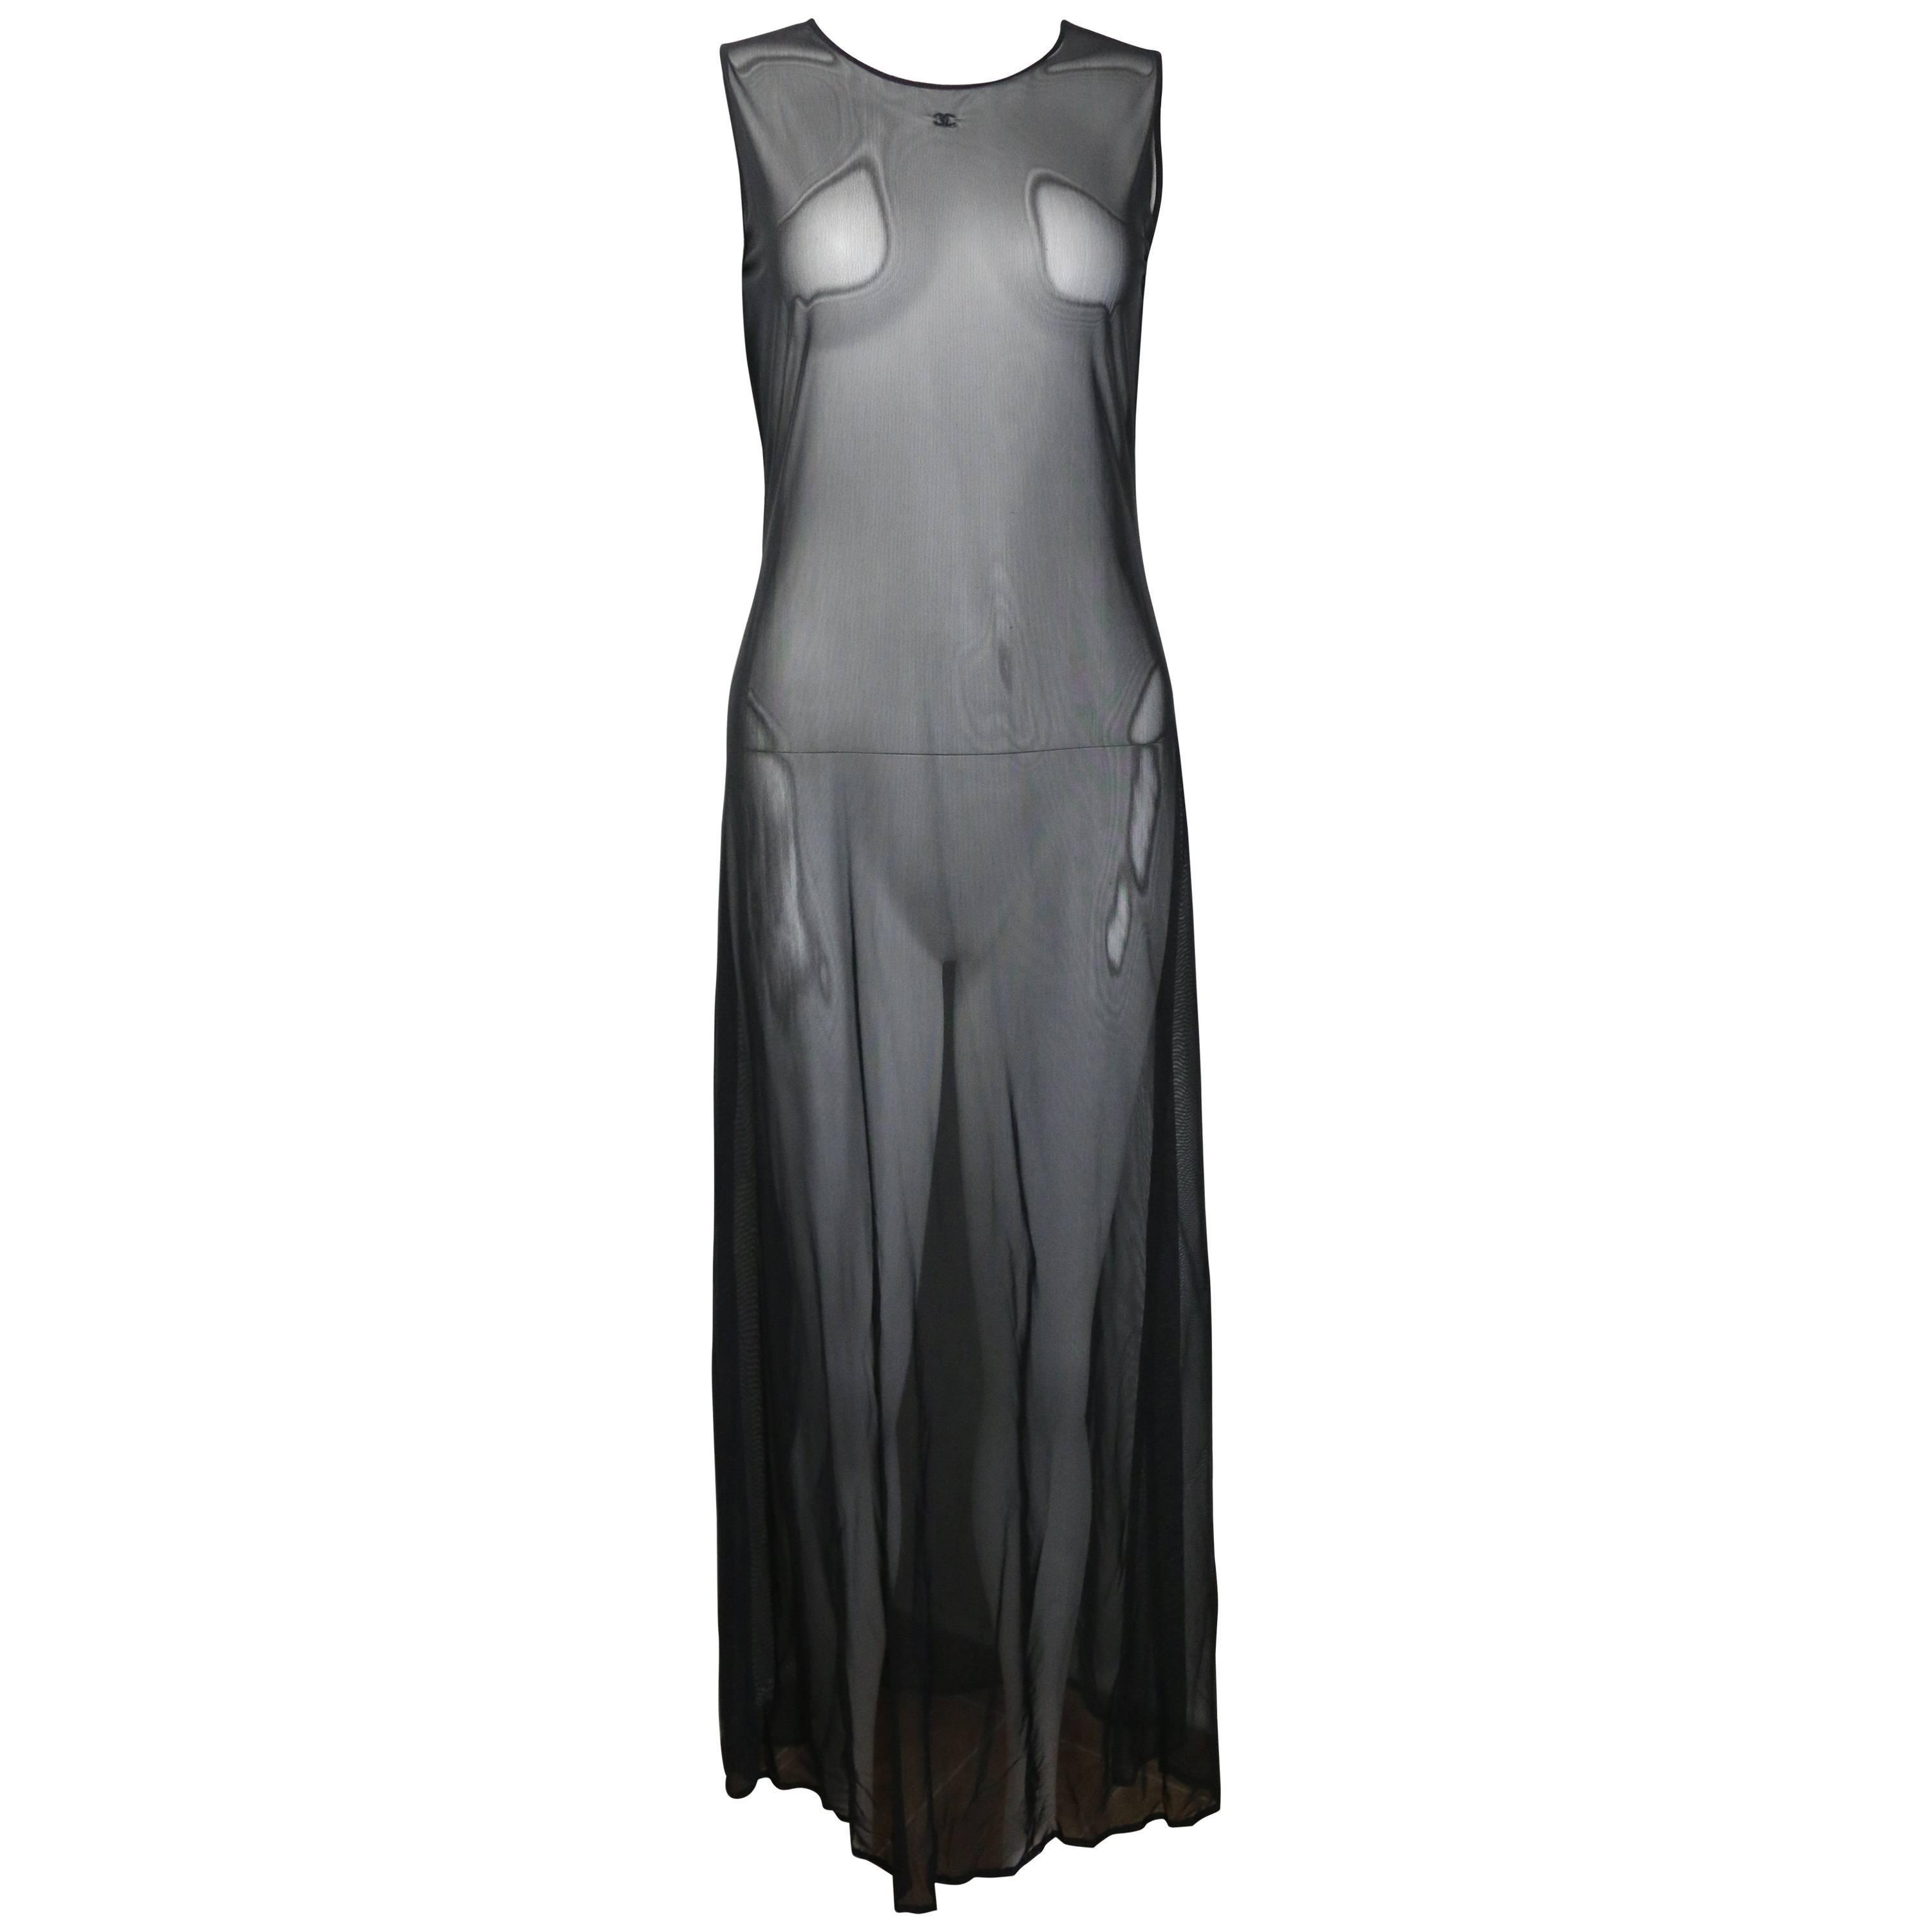 - Vintage Chanel black see through dress from 1999 cruise collection. This dress is totally see through and the fabric is stretchy and comfortable.  Its good to wear in hot weather and also a very darling dress to wear! 

- Made in France. 

- 82%